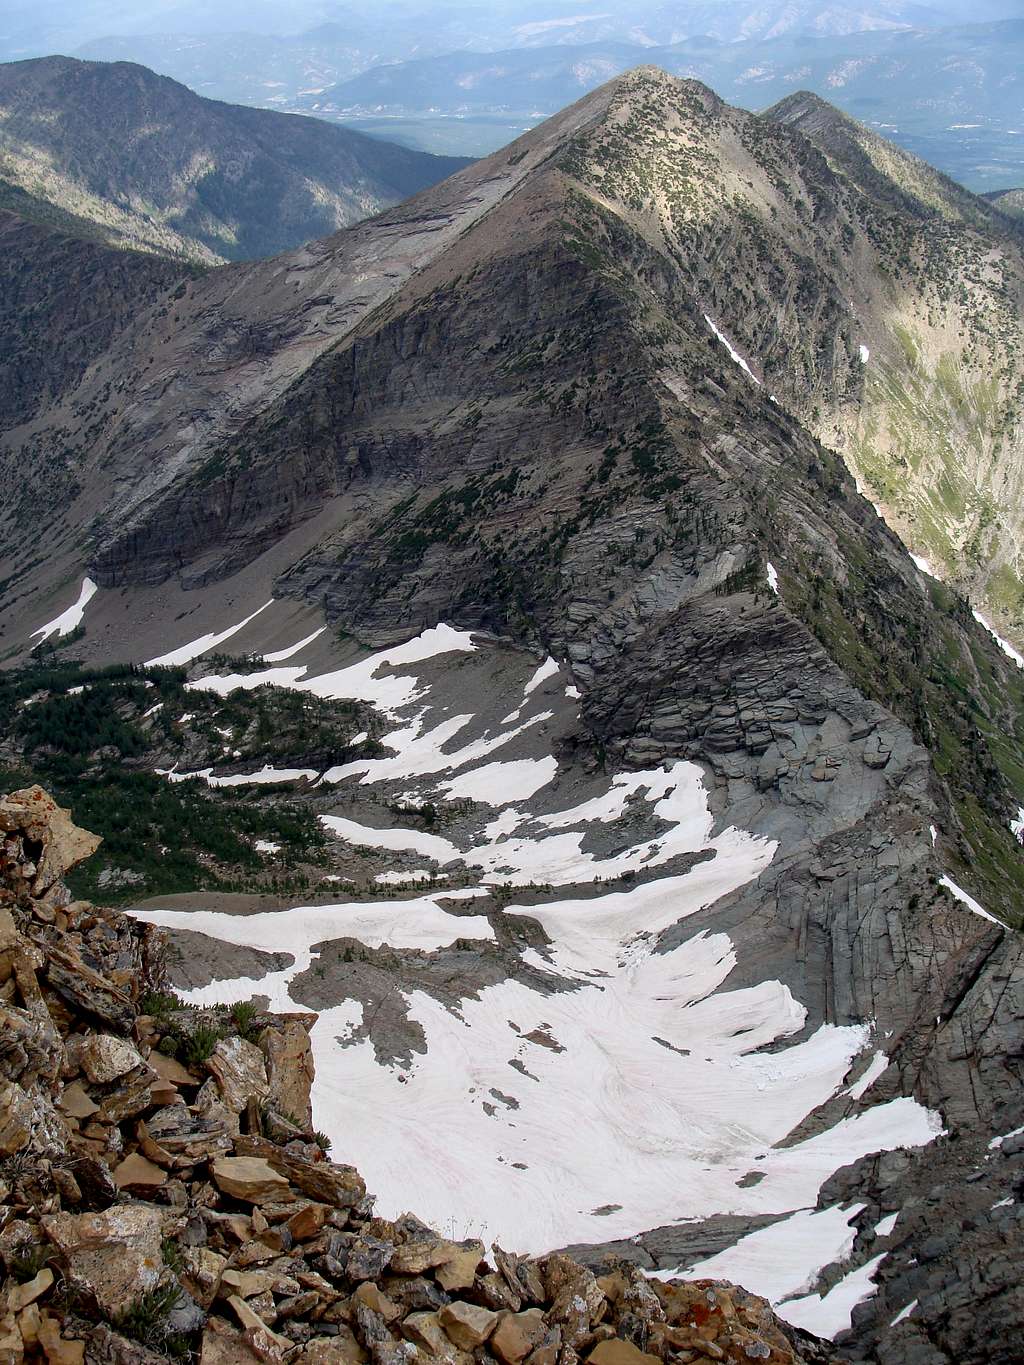 Part of Blackwell Glacier